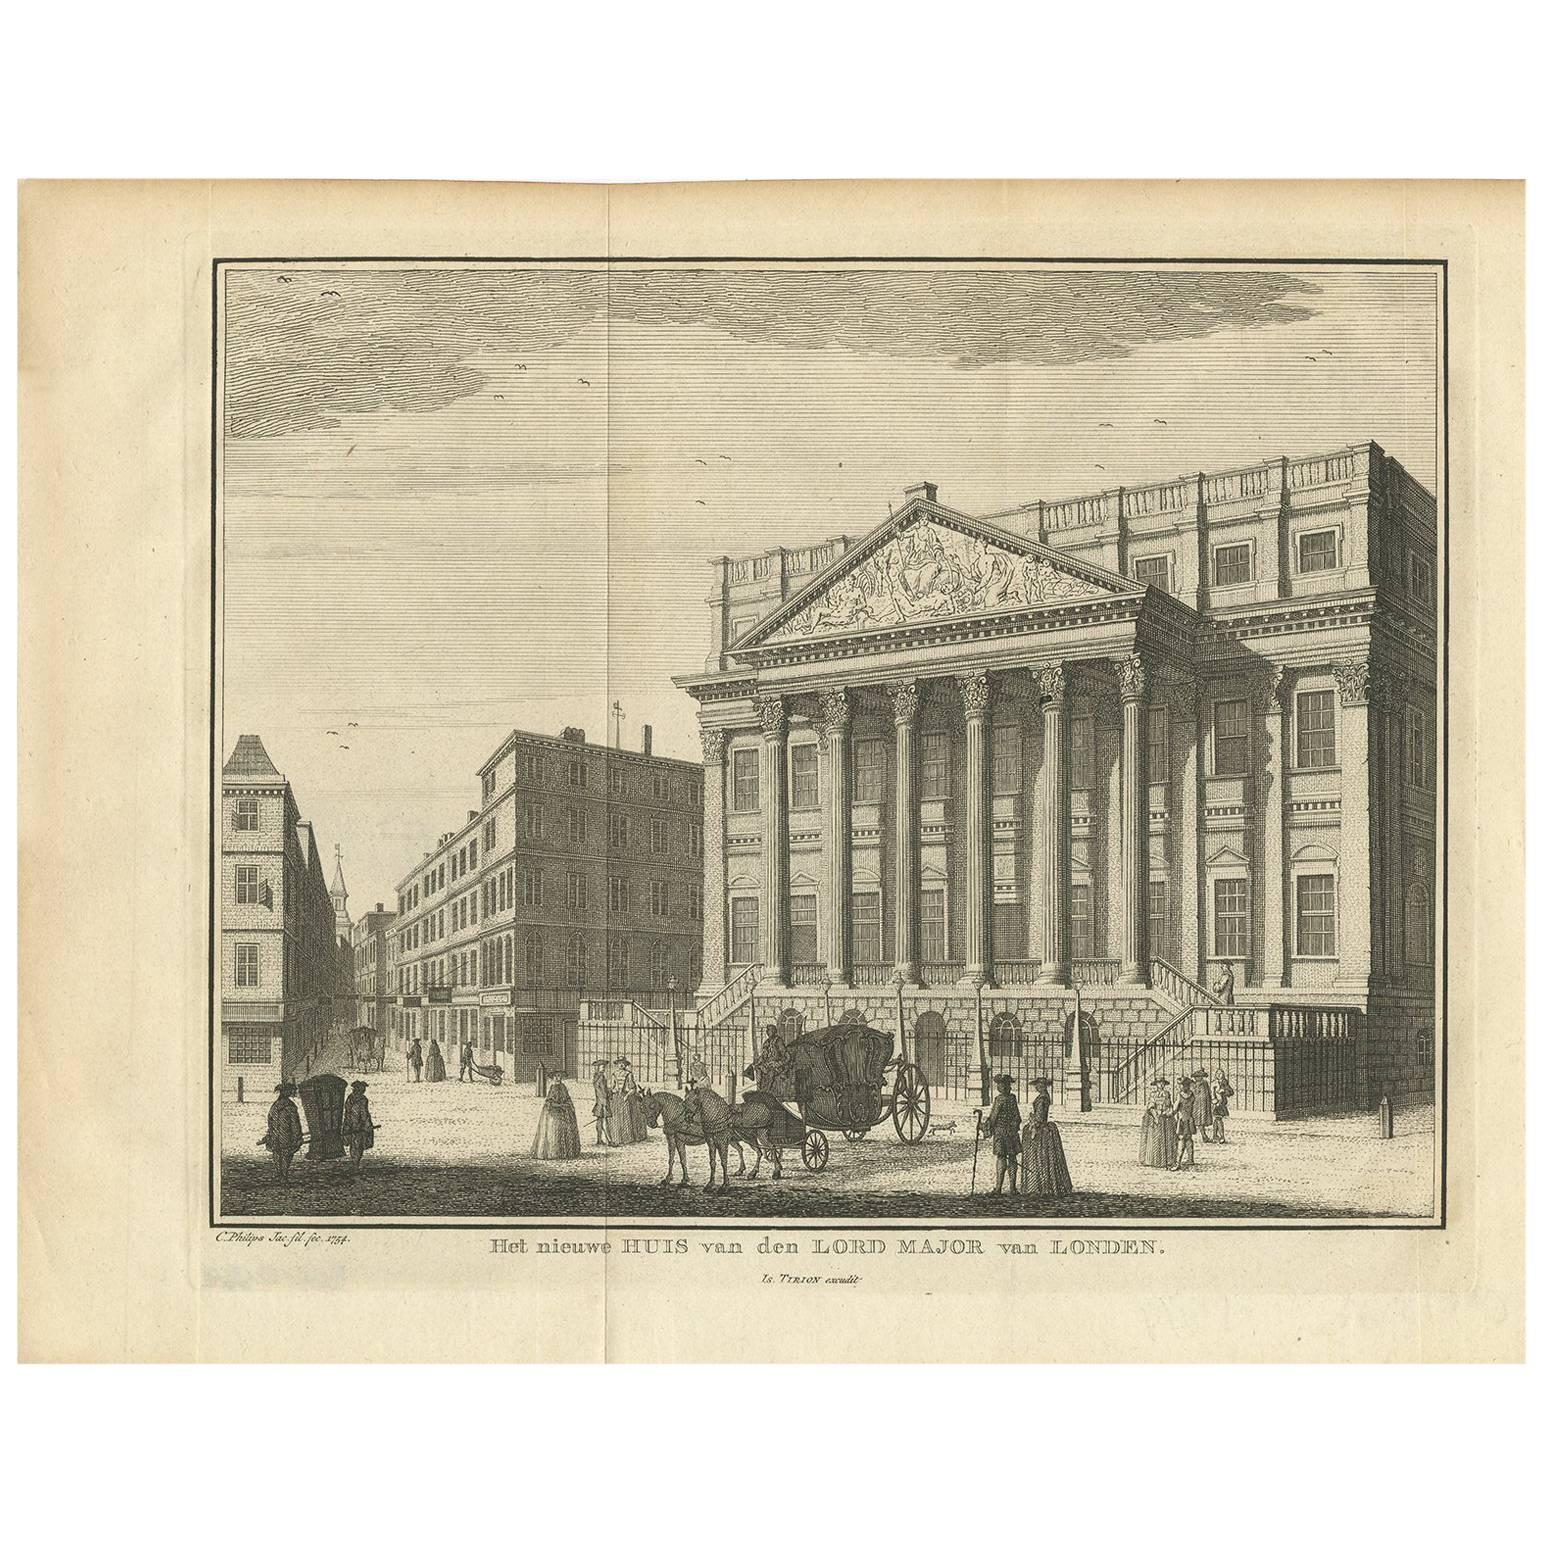 Antique Print of the New Residence of the Lord Major of London by I. Tirion